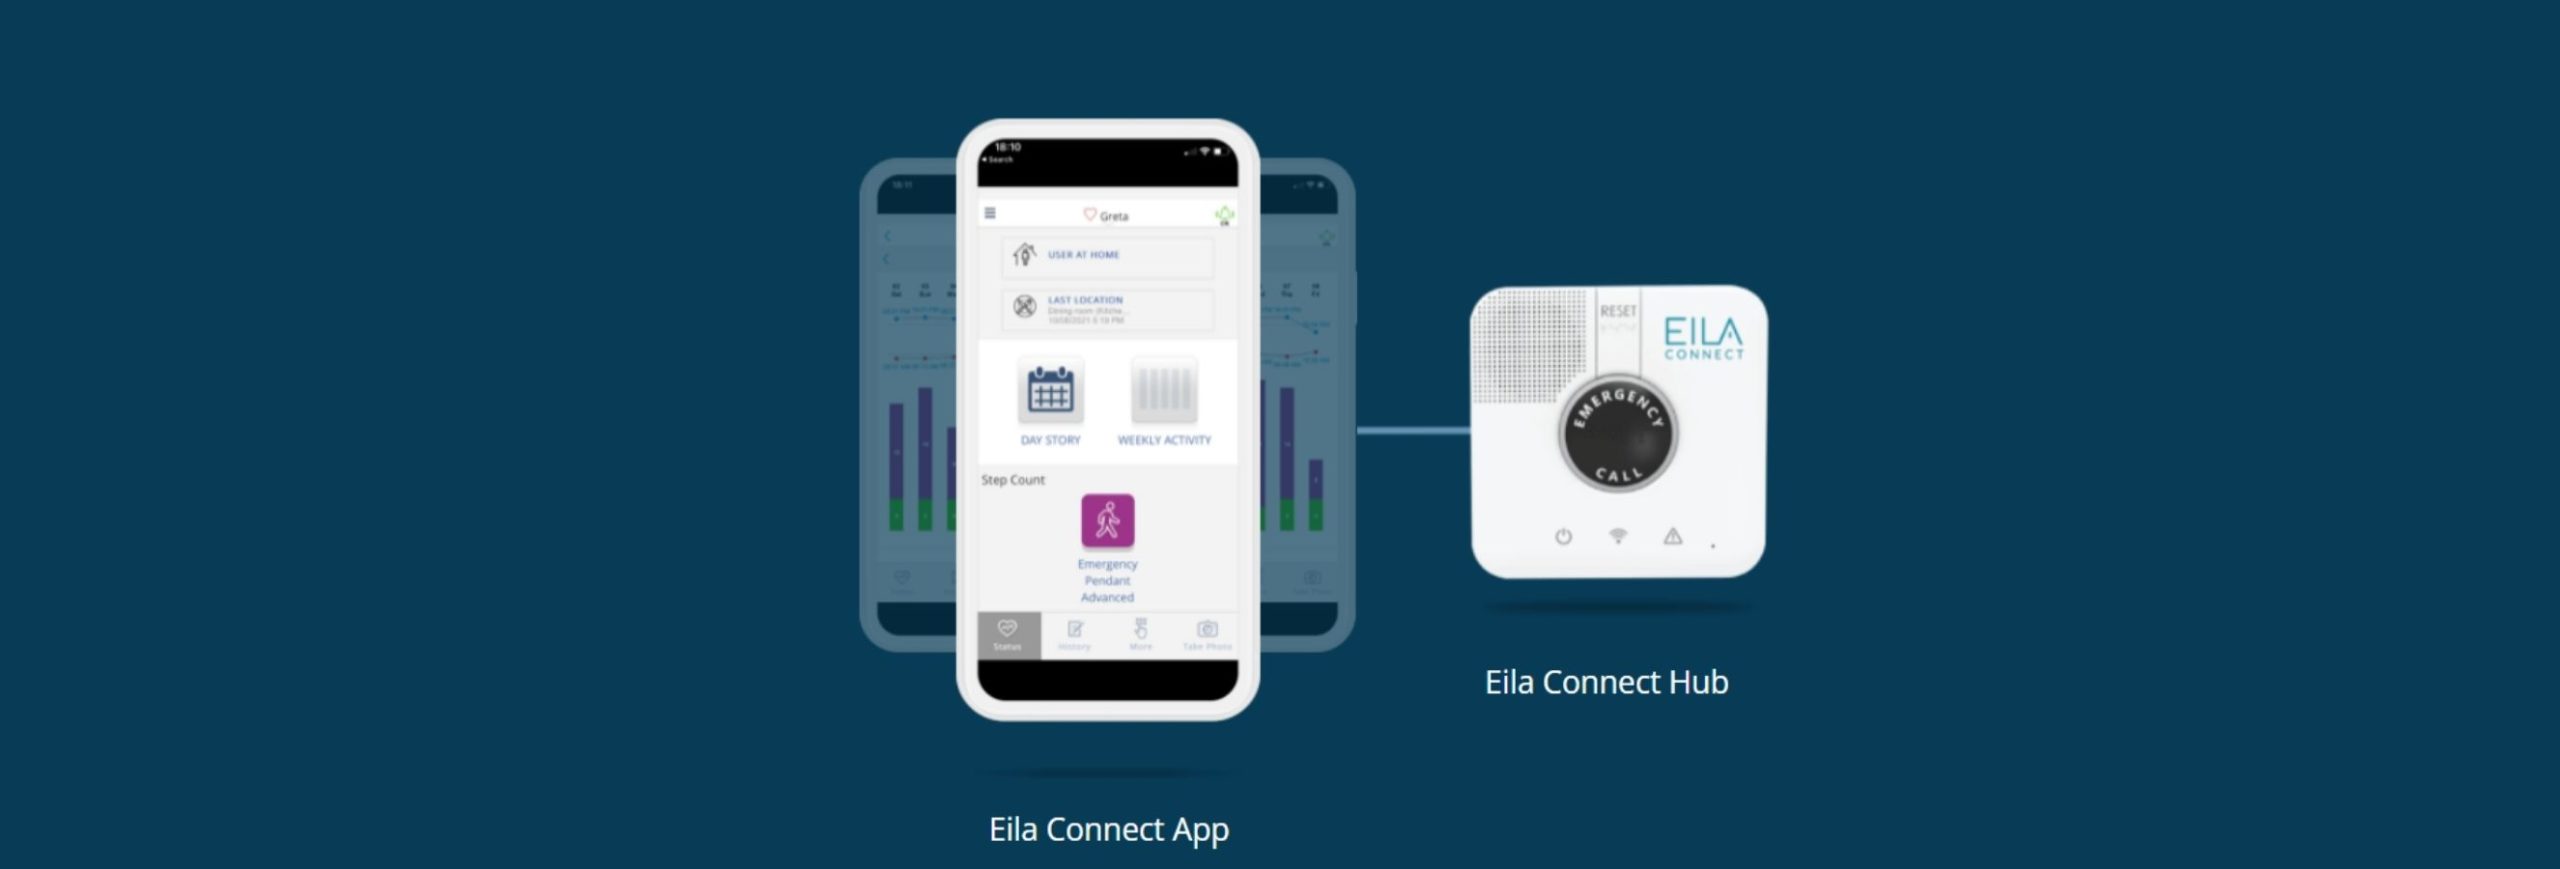 Introductory Summer Special At Eila Connect